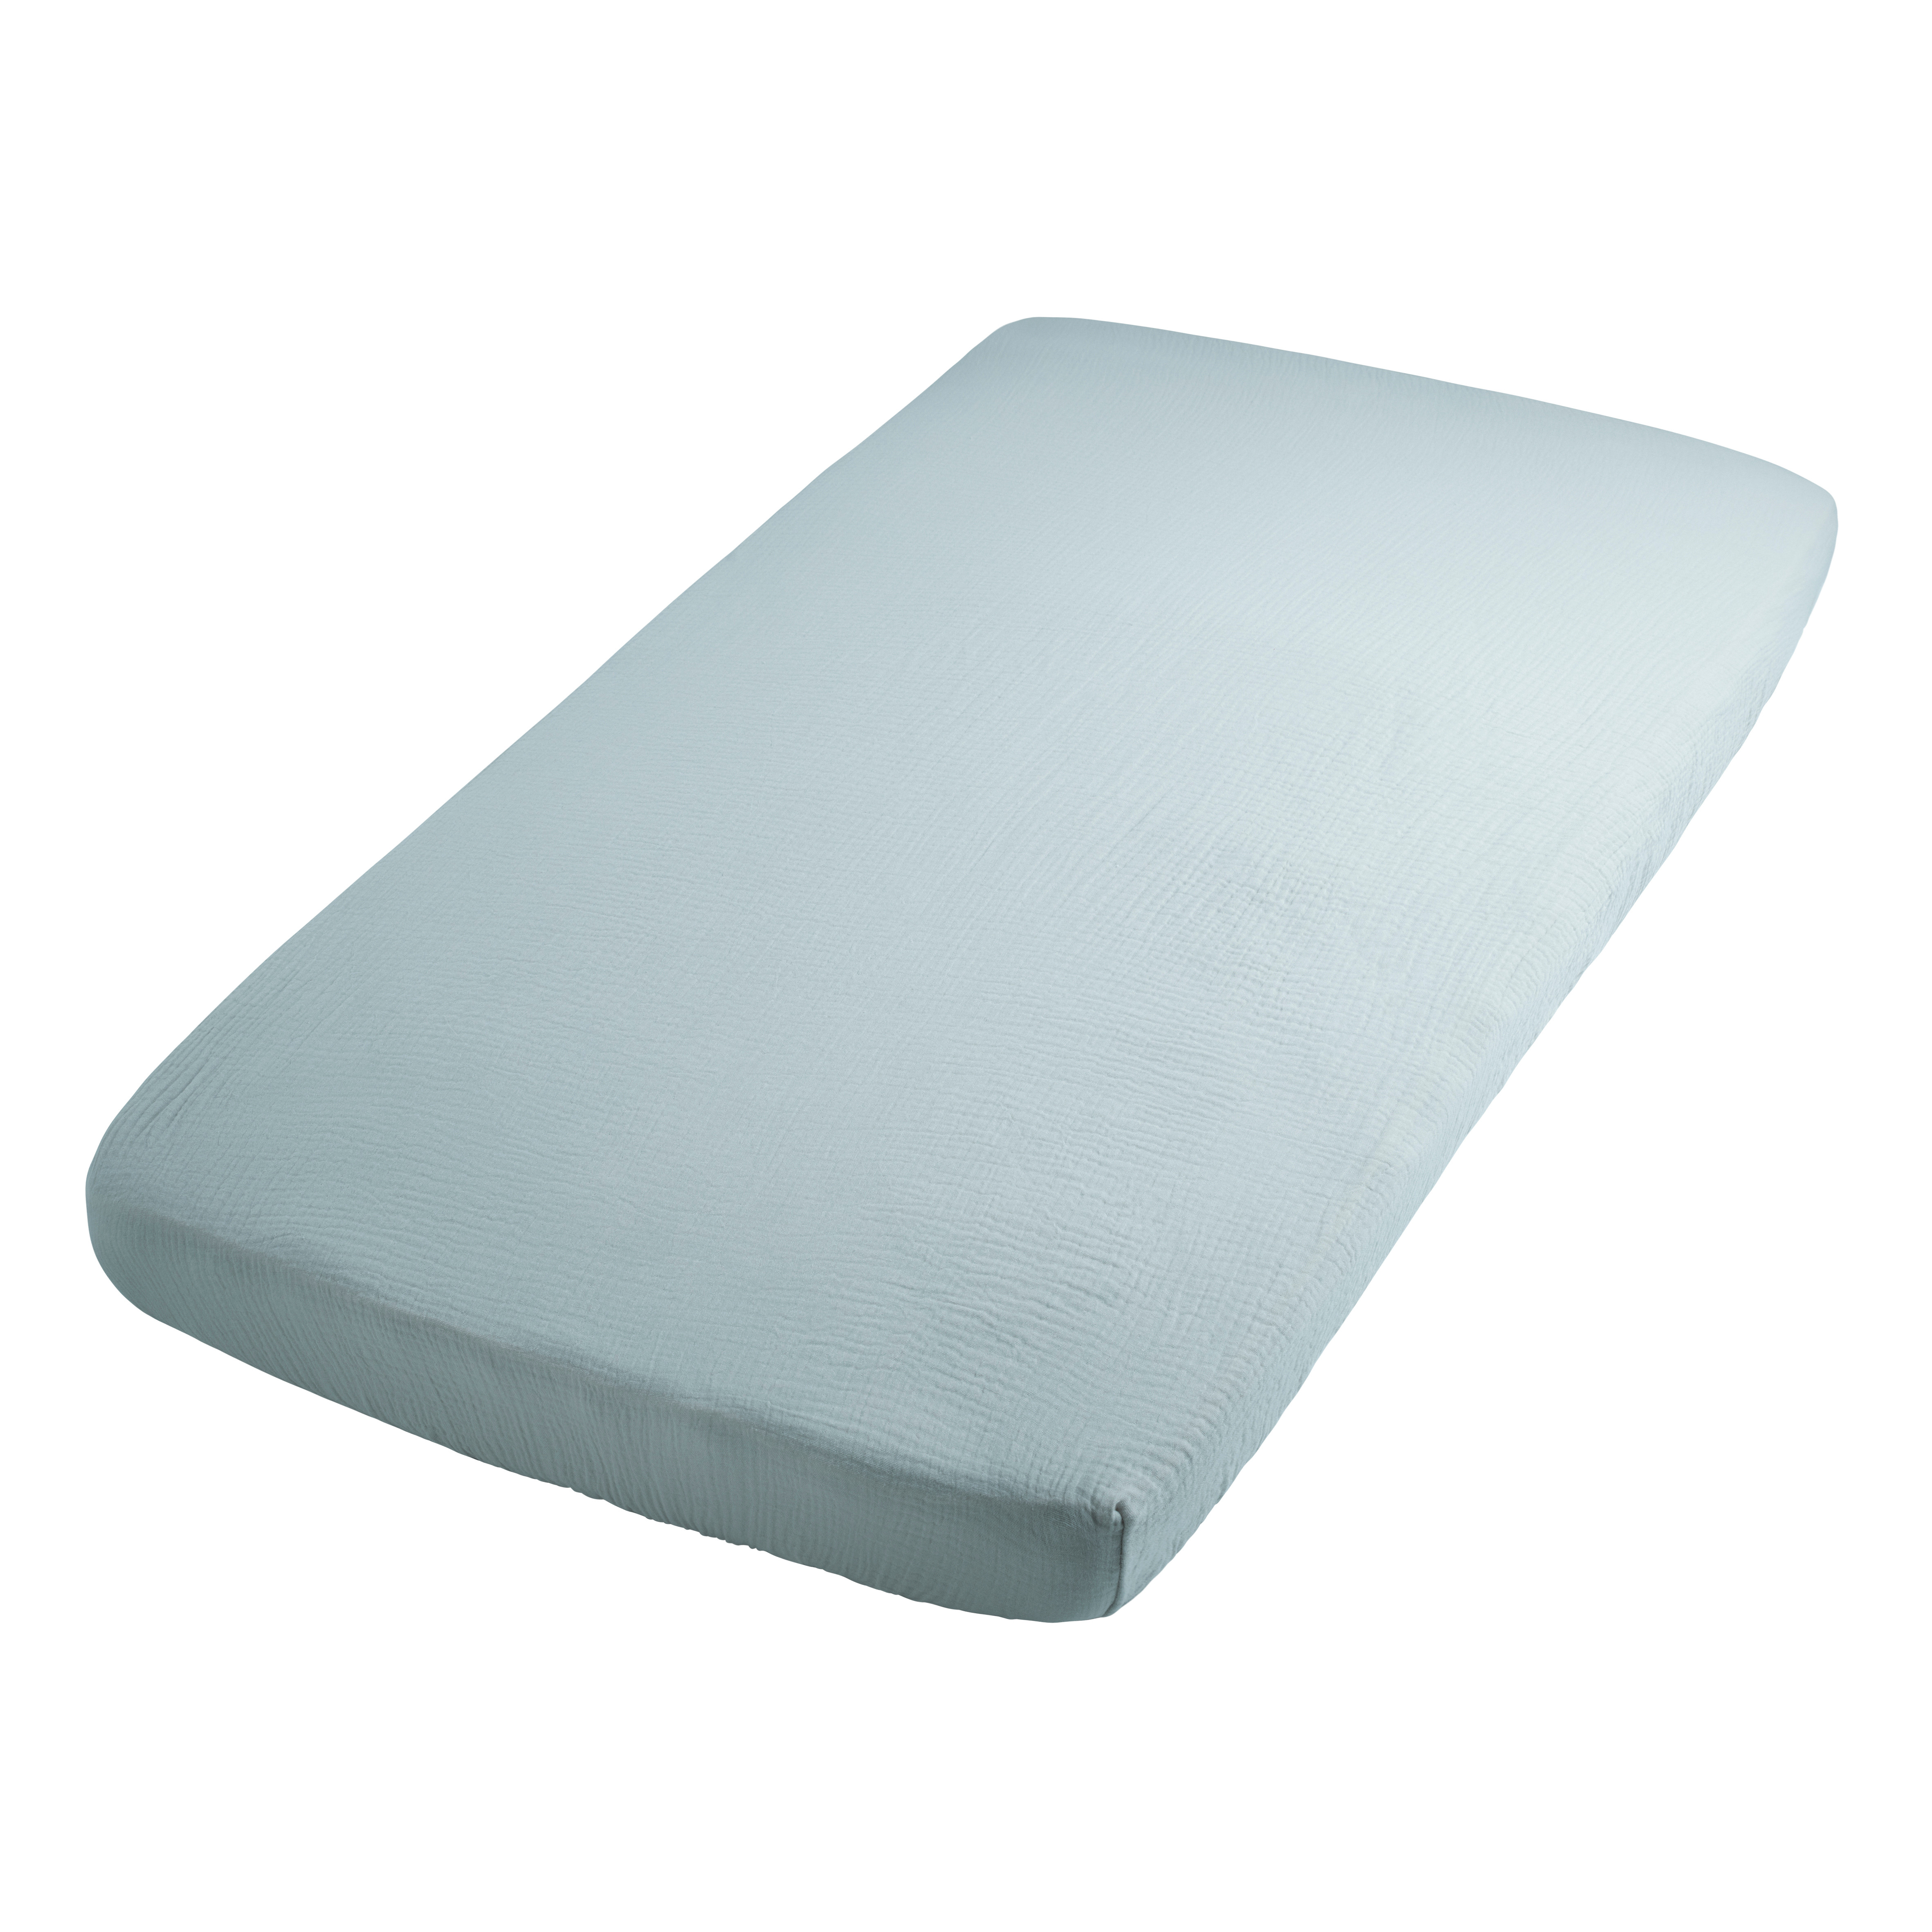 Fitted sheet Fresh ECO misty blue - 60x120